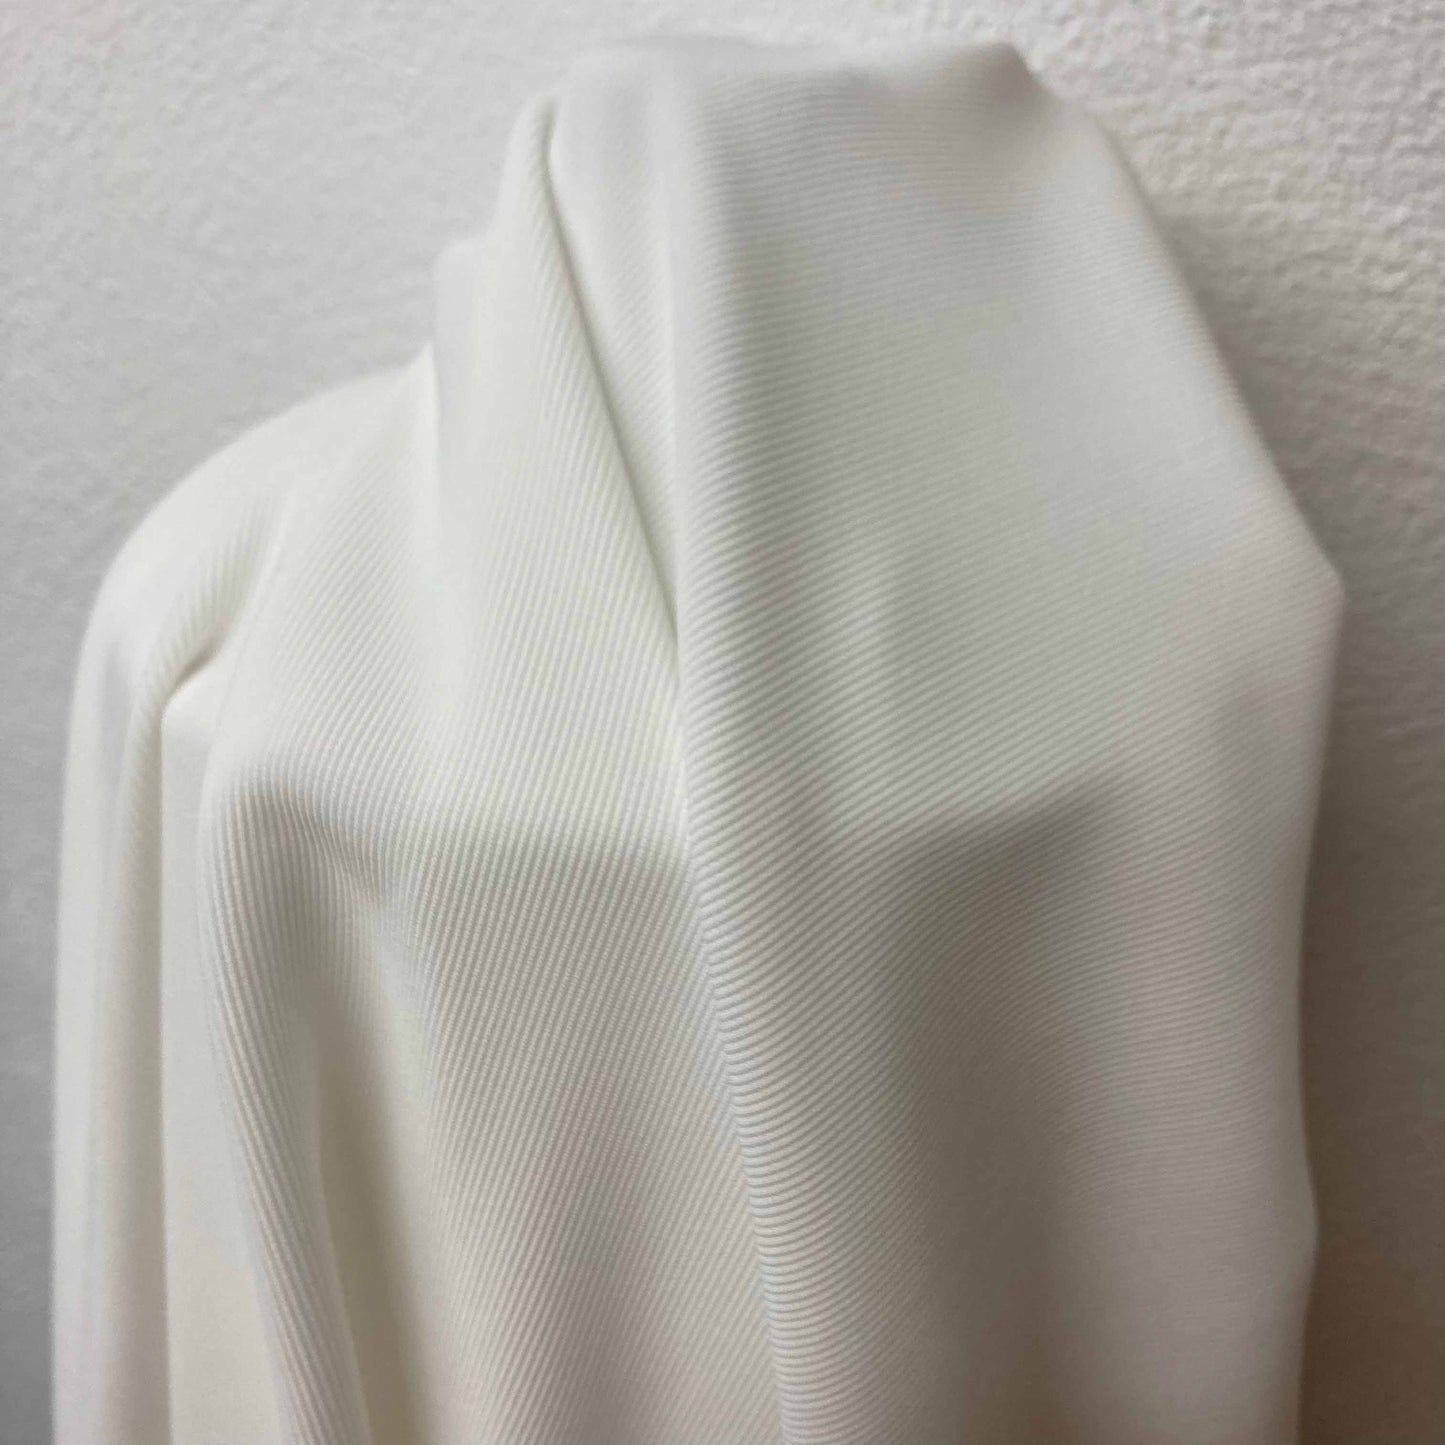 B-stock double knit Fabric - Off-white *